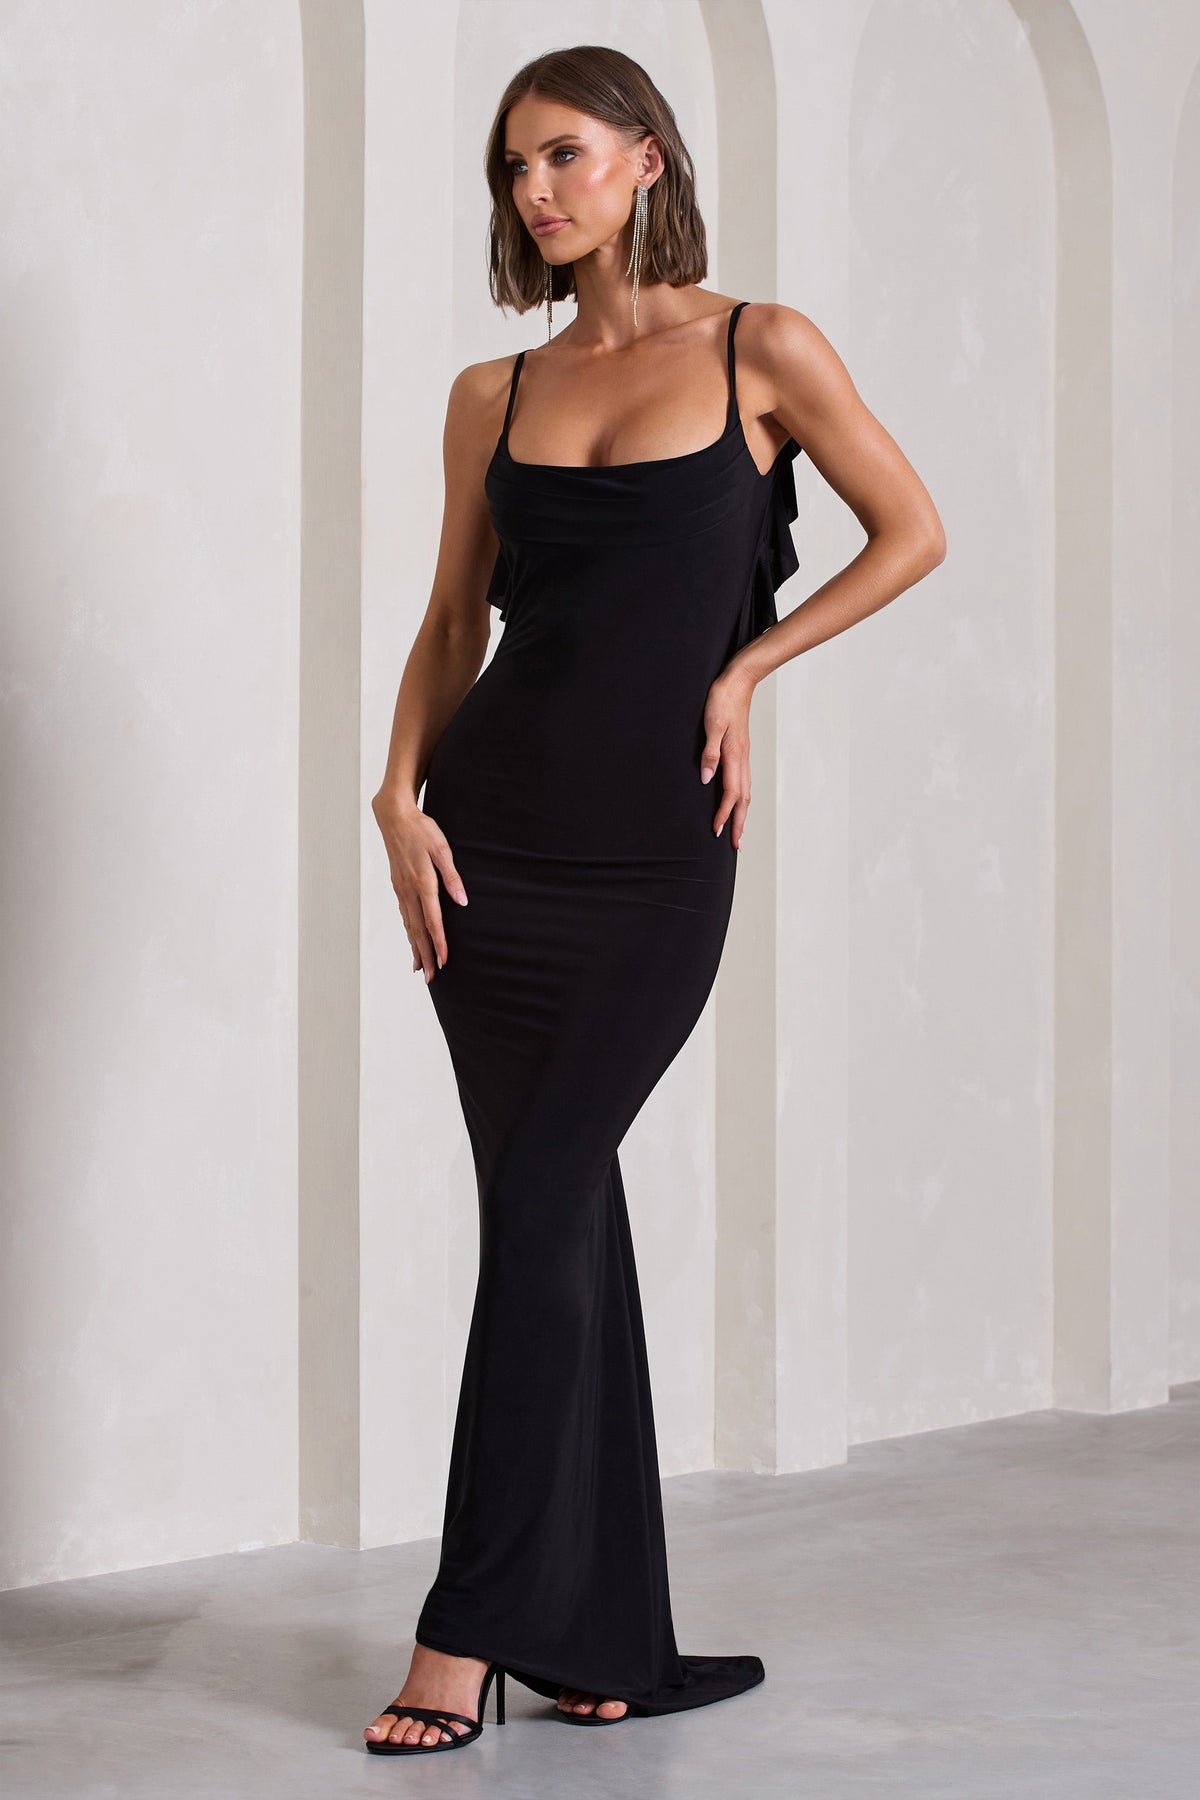 Flute Black Bodycon Maxi Dress With Ruched Ruffled Back – Club L